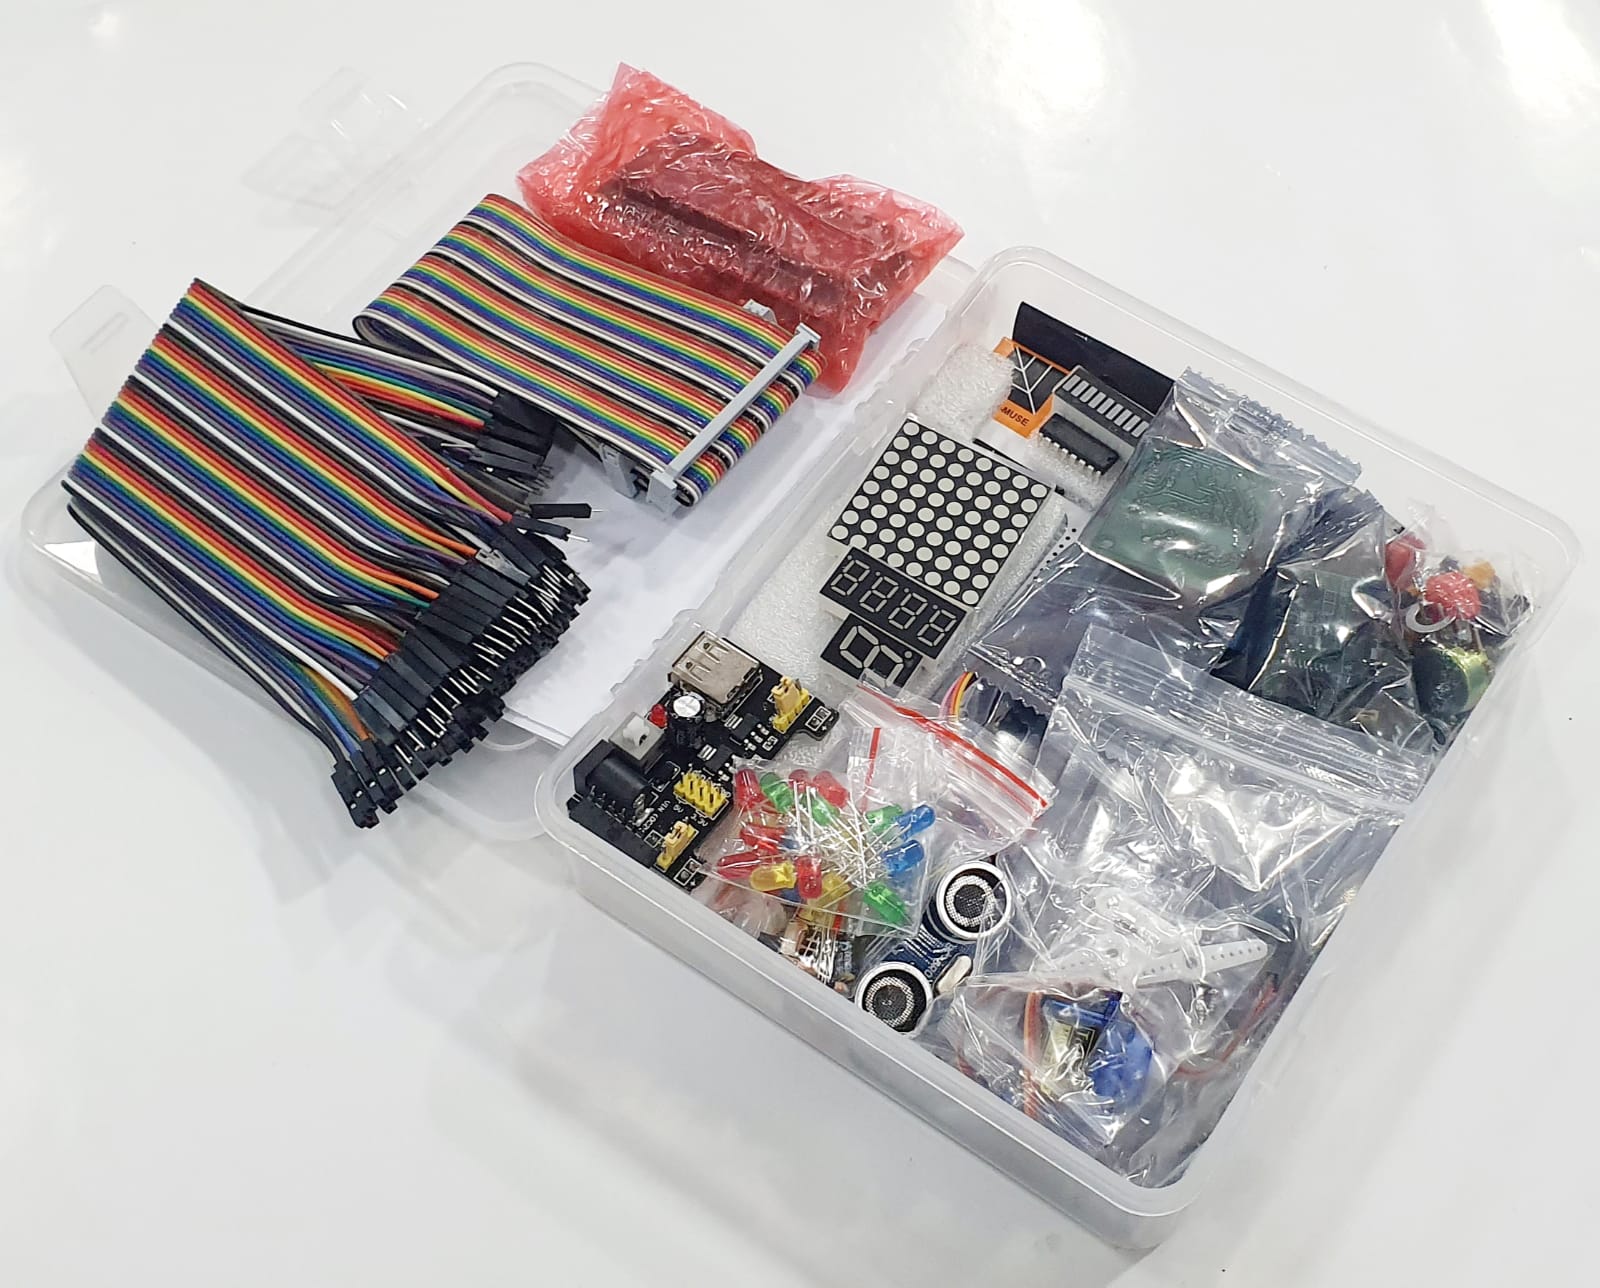 Project Kit For Raspberry